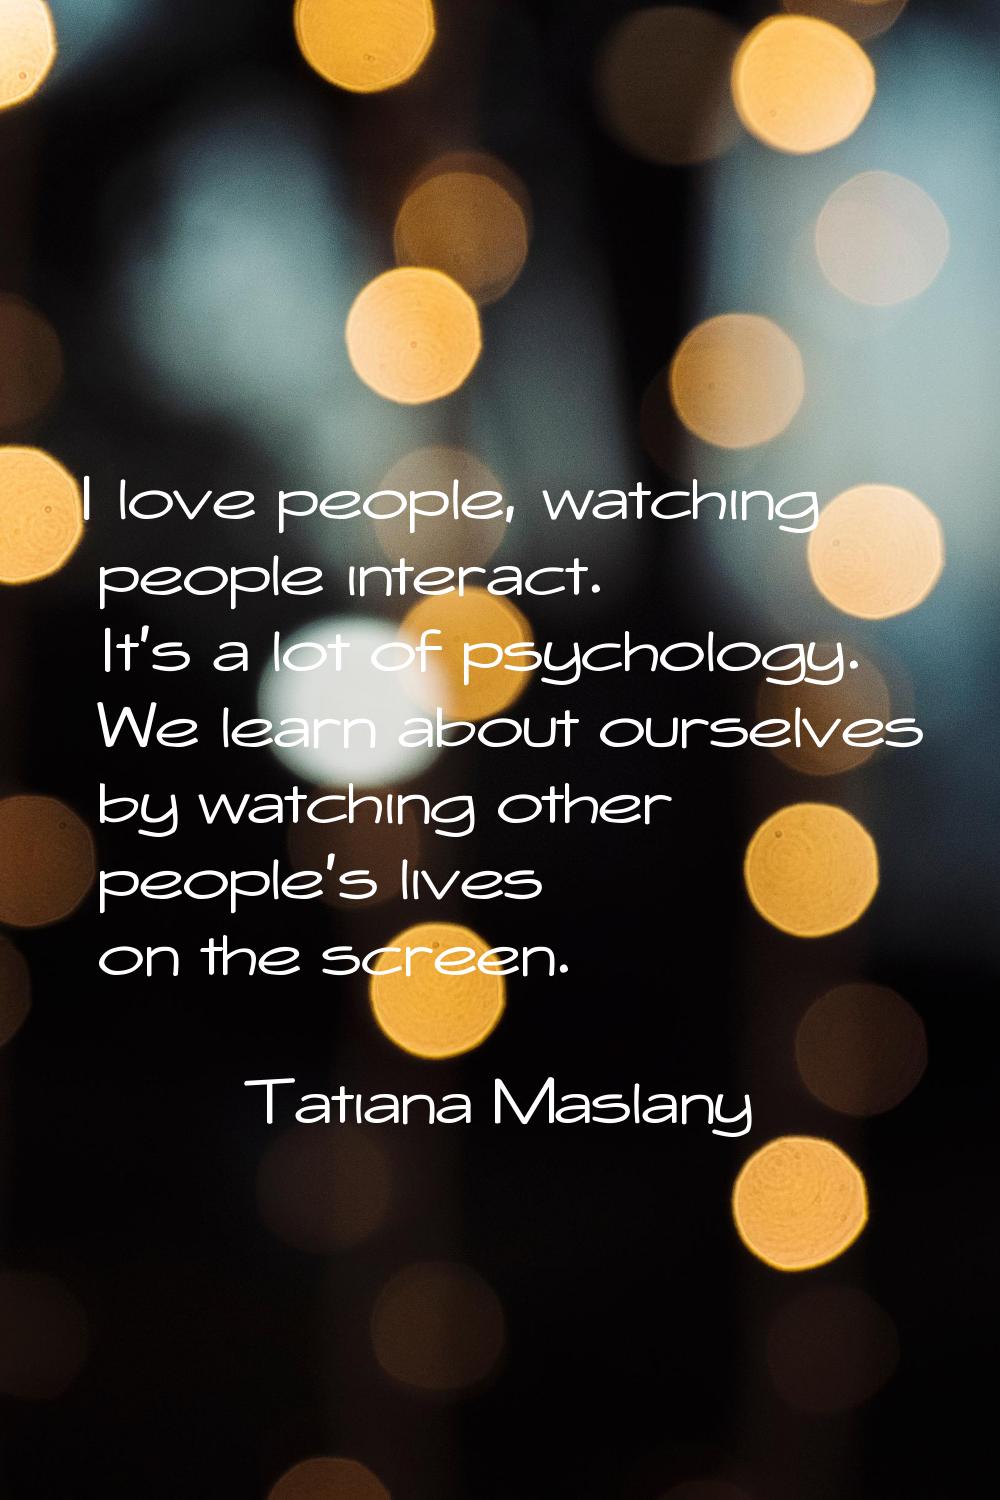 I love people, watching people interact. It's a lot of psychology. We learn about ourselves by watc